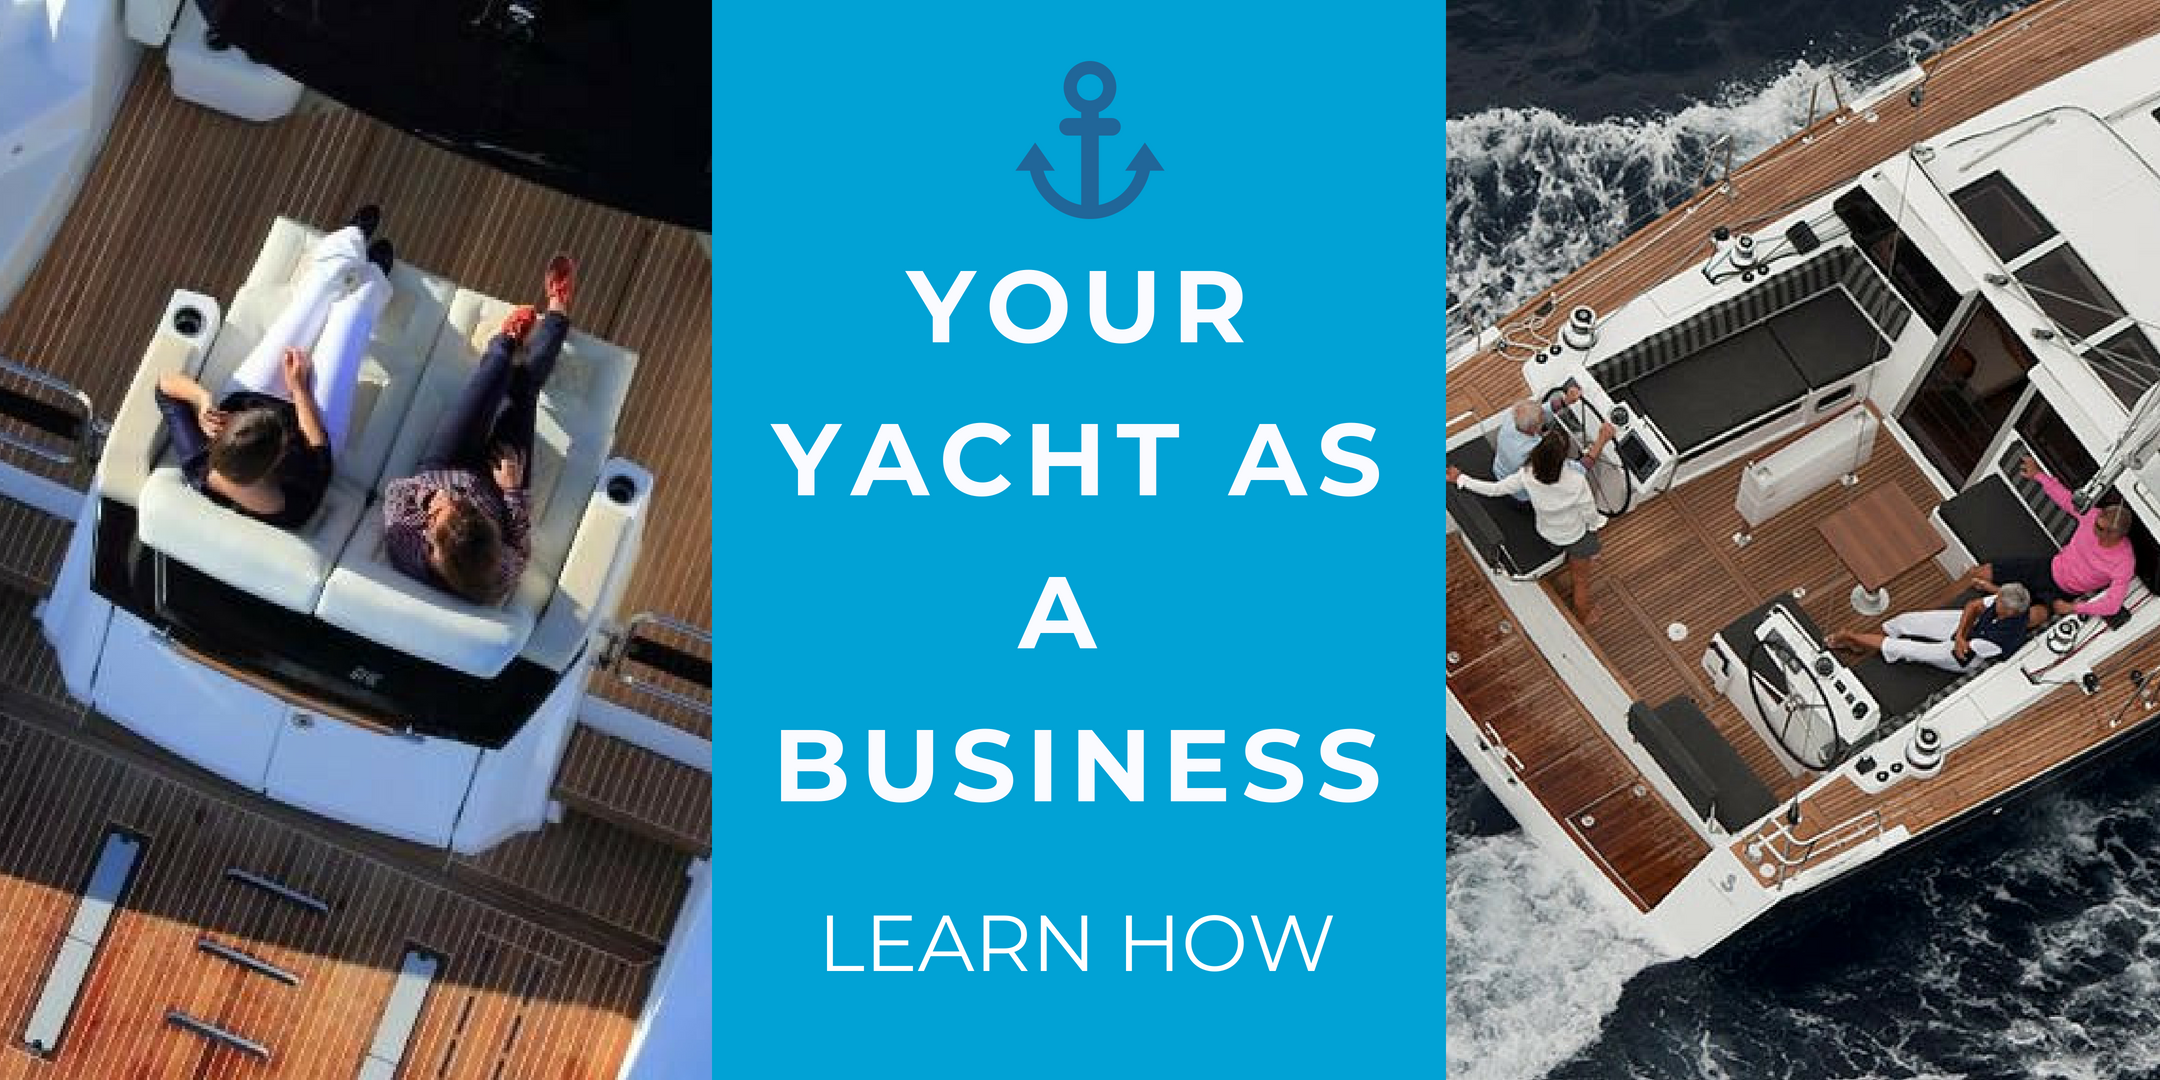 2020 Your Yacht As A Business Webinar: Save on taxes and the cost of boat ownership